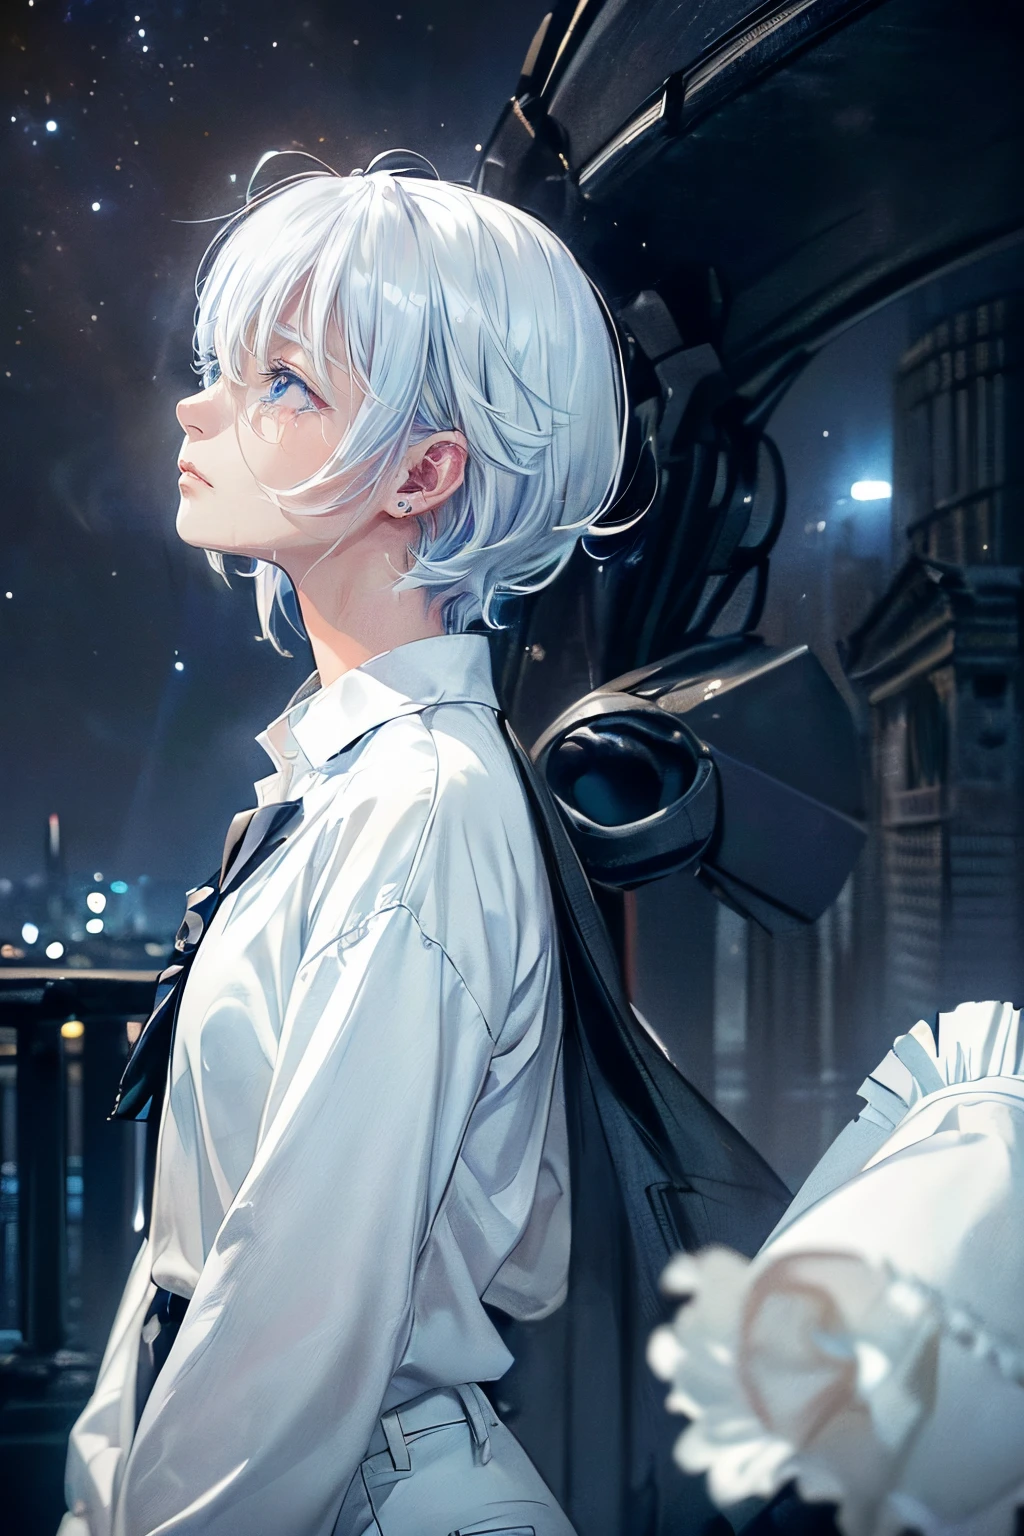 ((4K works))、​masterpiece、(top-quality)、1 beutiful girl、Slim body、tall、((Black Y-shirt and white pants、Charming English knight style))、Please wear one jacket、(Detailed beautiful eyes)、Fantastic night city、((city under the starry sky))、Fantastic city at midnight、((Face similar to Carly Rae Jepsen))、((Short-haired white hair))、((Smaller face))、((Neutral face))、((Bright blue eyes))、((American adult women))、((Adult female 26 years old))、((cool lady))、((Like a celebrity))、((Crying expression))、((Sad look))、((Korean Makeup))、((elongated and sharp eyes))、((Happy dating))、((boyish))、((Upper body photography))、Professional Photos、((Shot alone))、((She is looking up at the sky under the roof))、((Shot from the side))、((Crying profile))、((Face crying in pain))、((She is facing upwards))、((Her eyes are looking down))、((she is standing next to the viewer))、rearing、solitude、saddened、desolate、suffocating、heartbreaking、auw